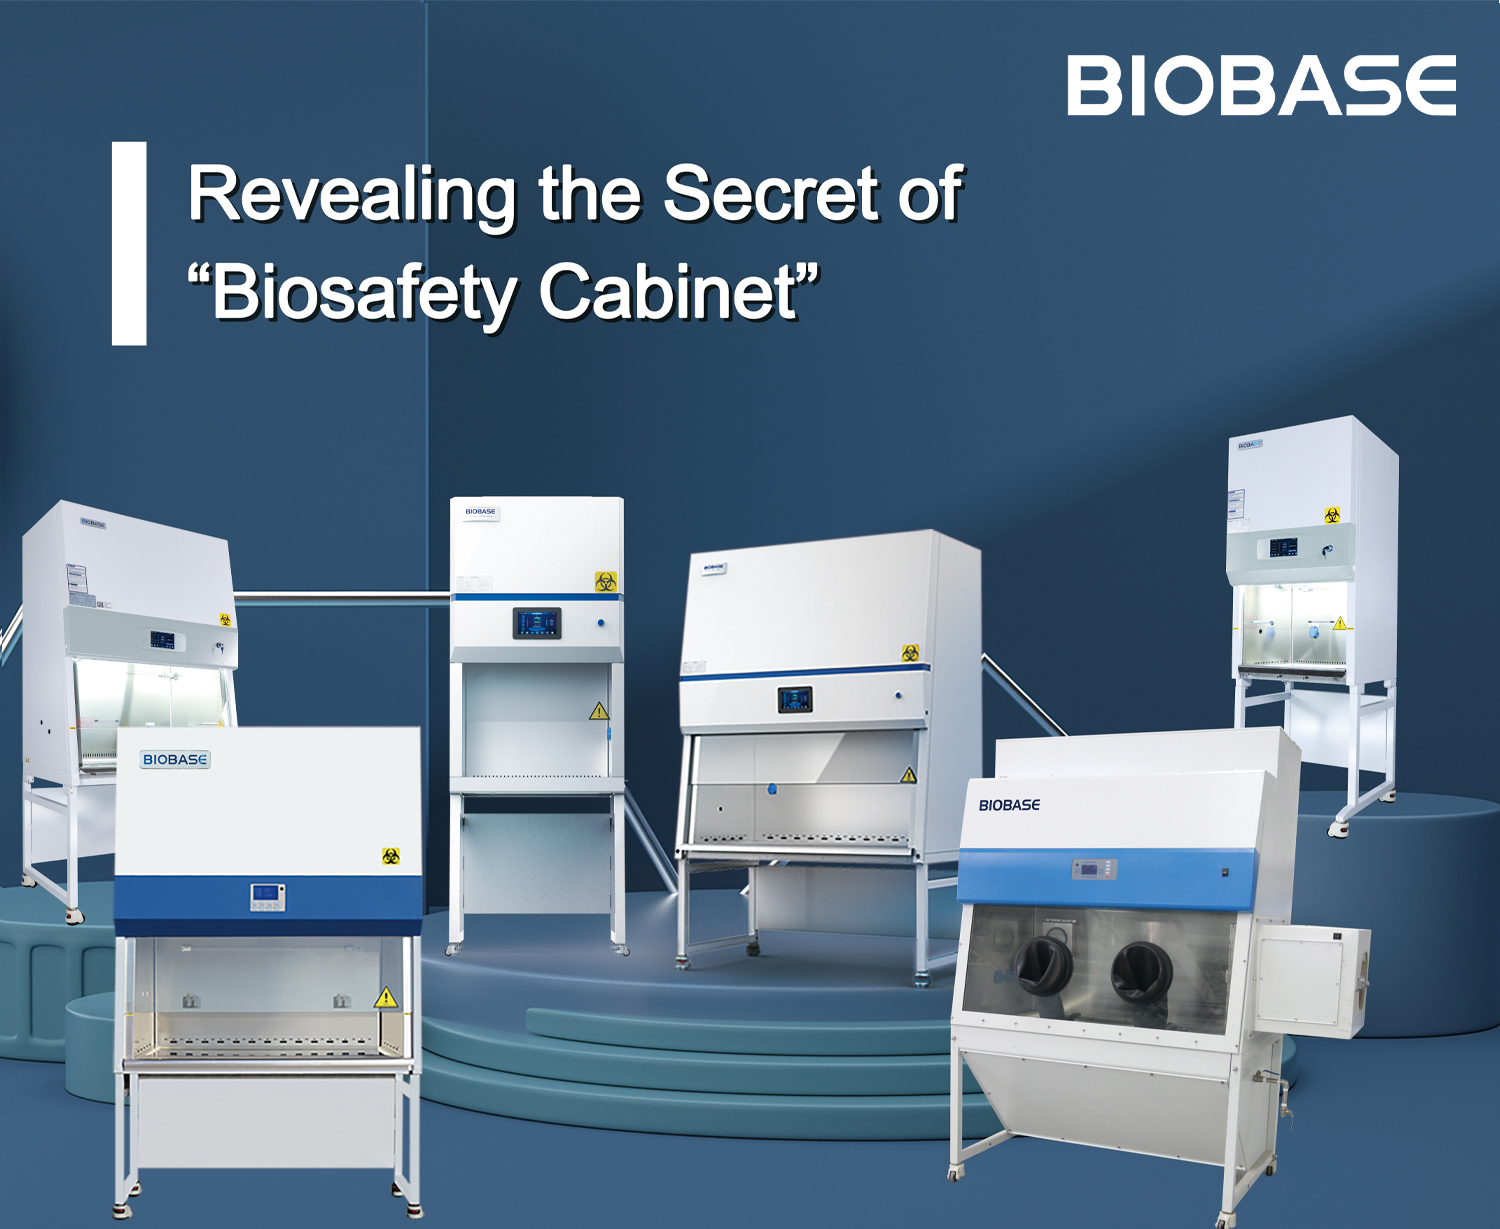 Revealing the Secret of “Biosafety Cabinet”